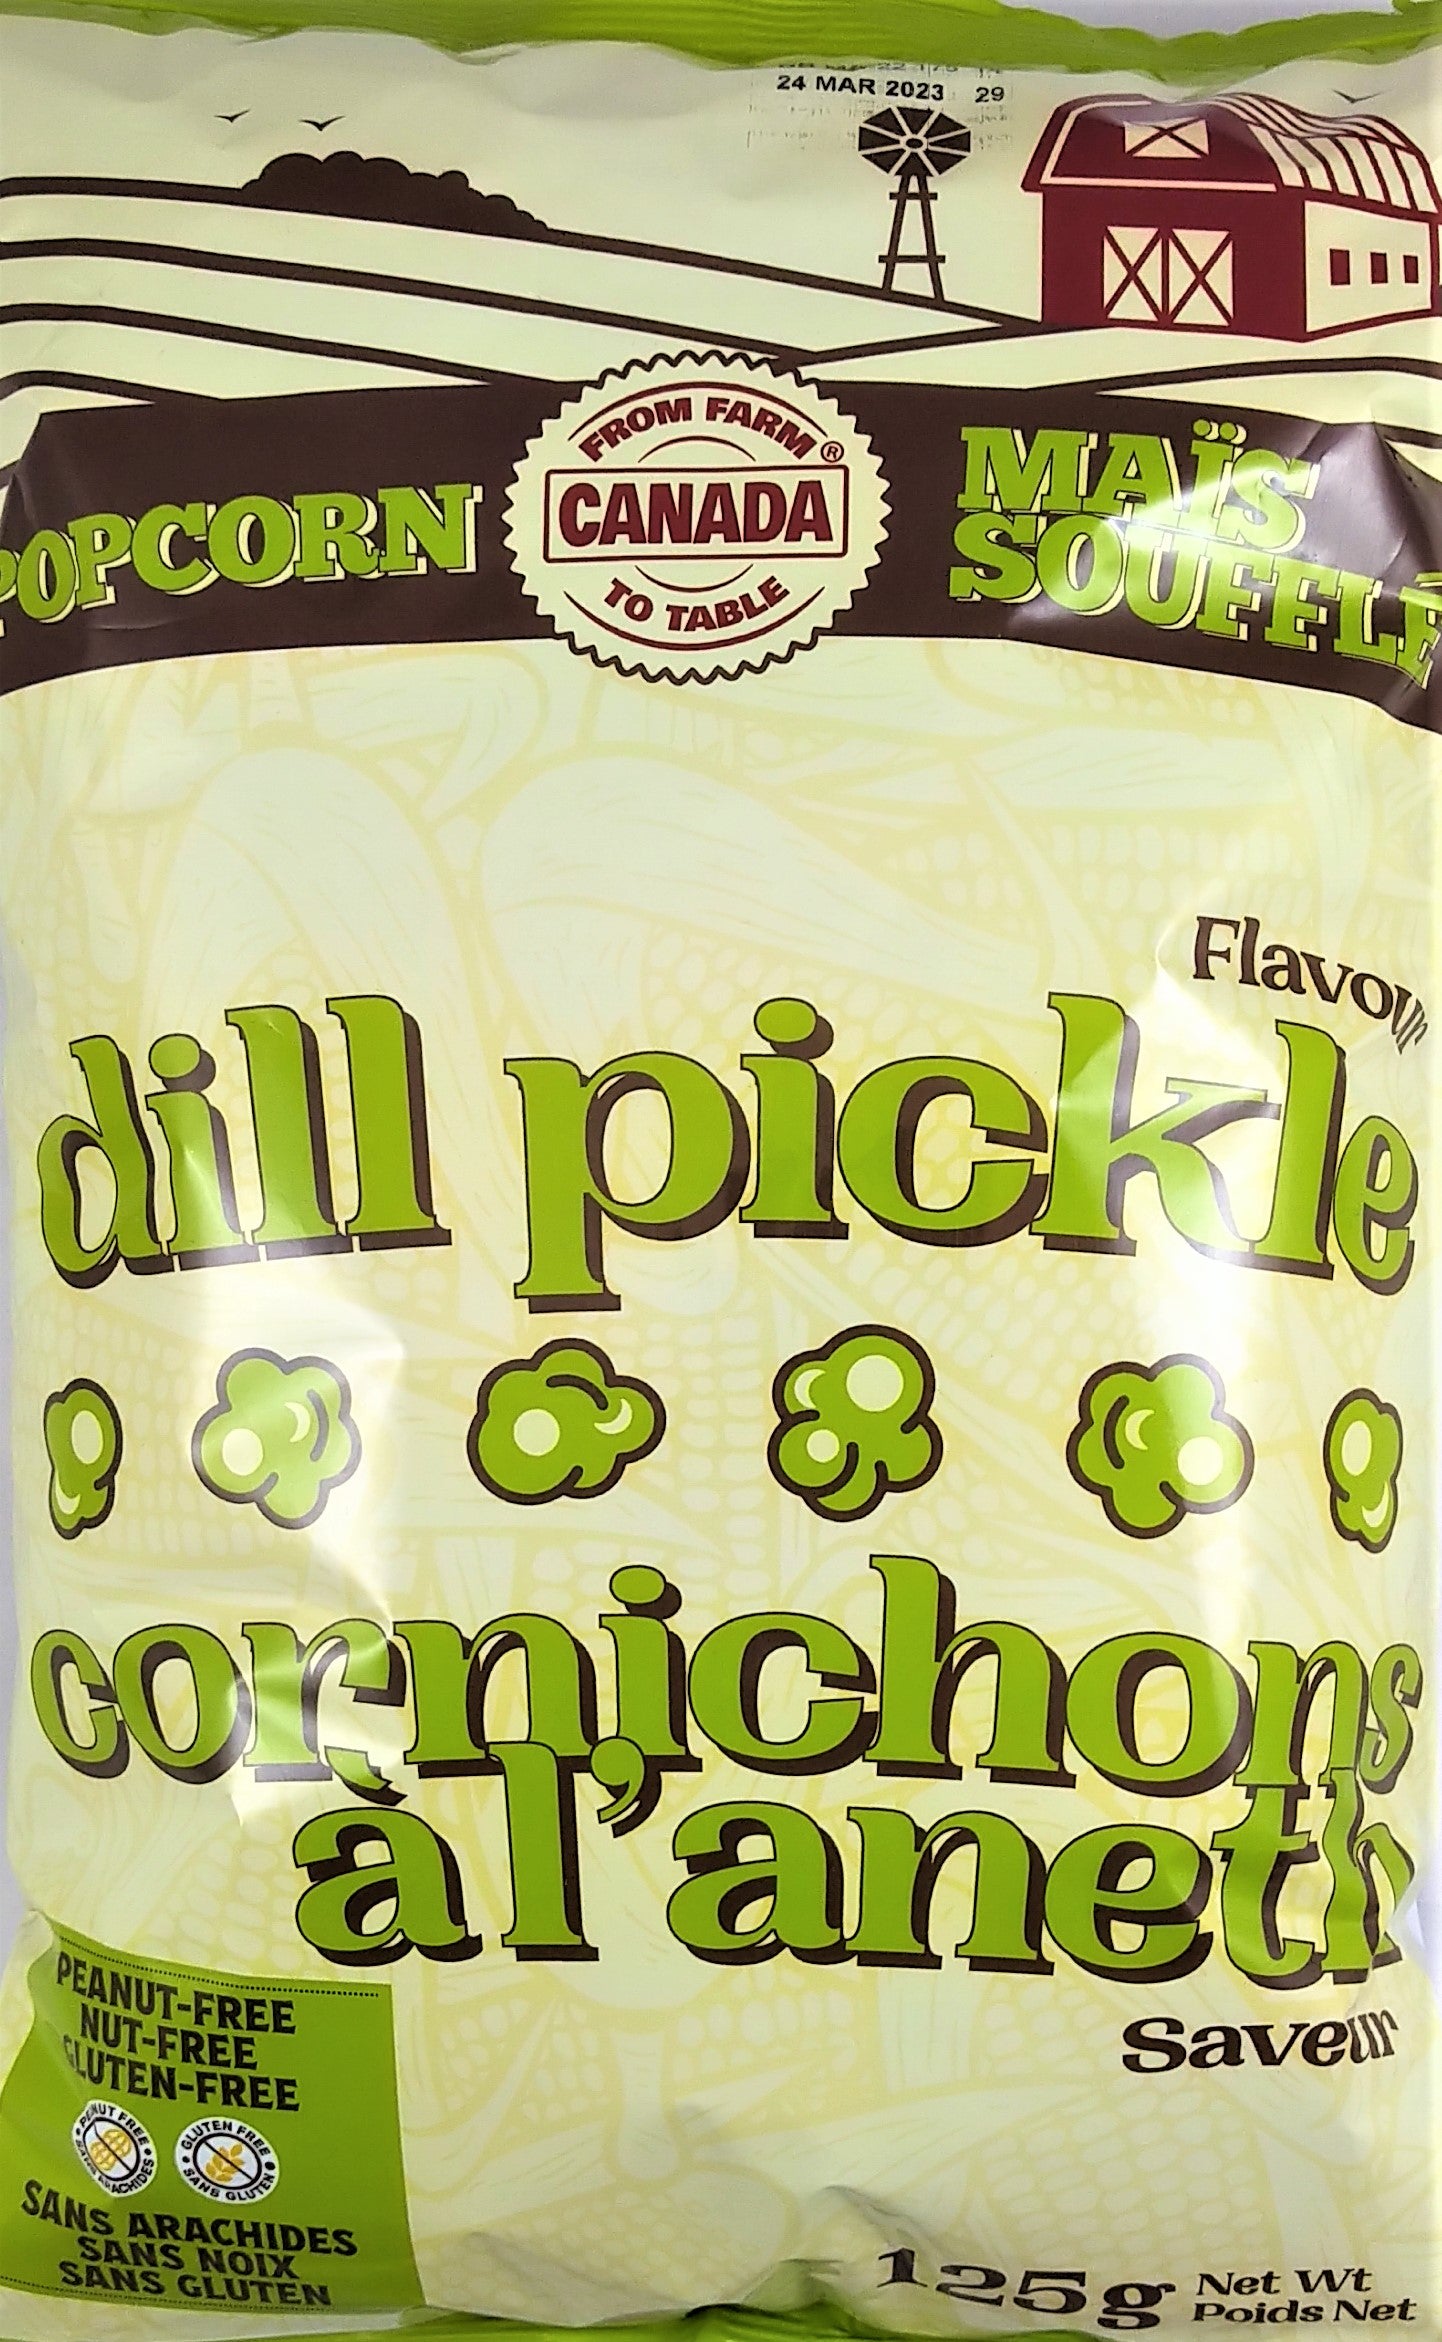 From Farm to Table Popcorn Dill Pickle 12/125g